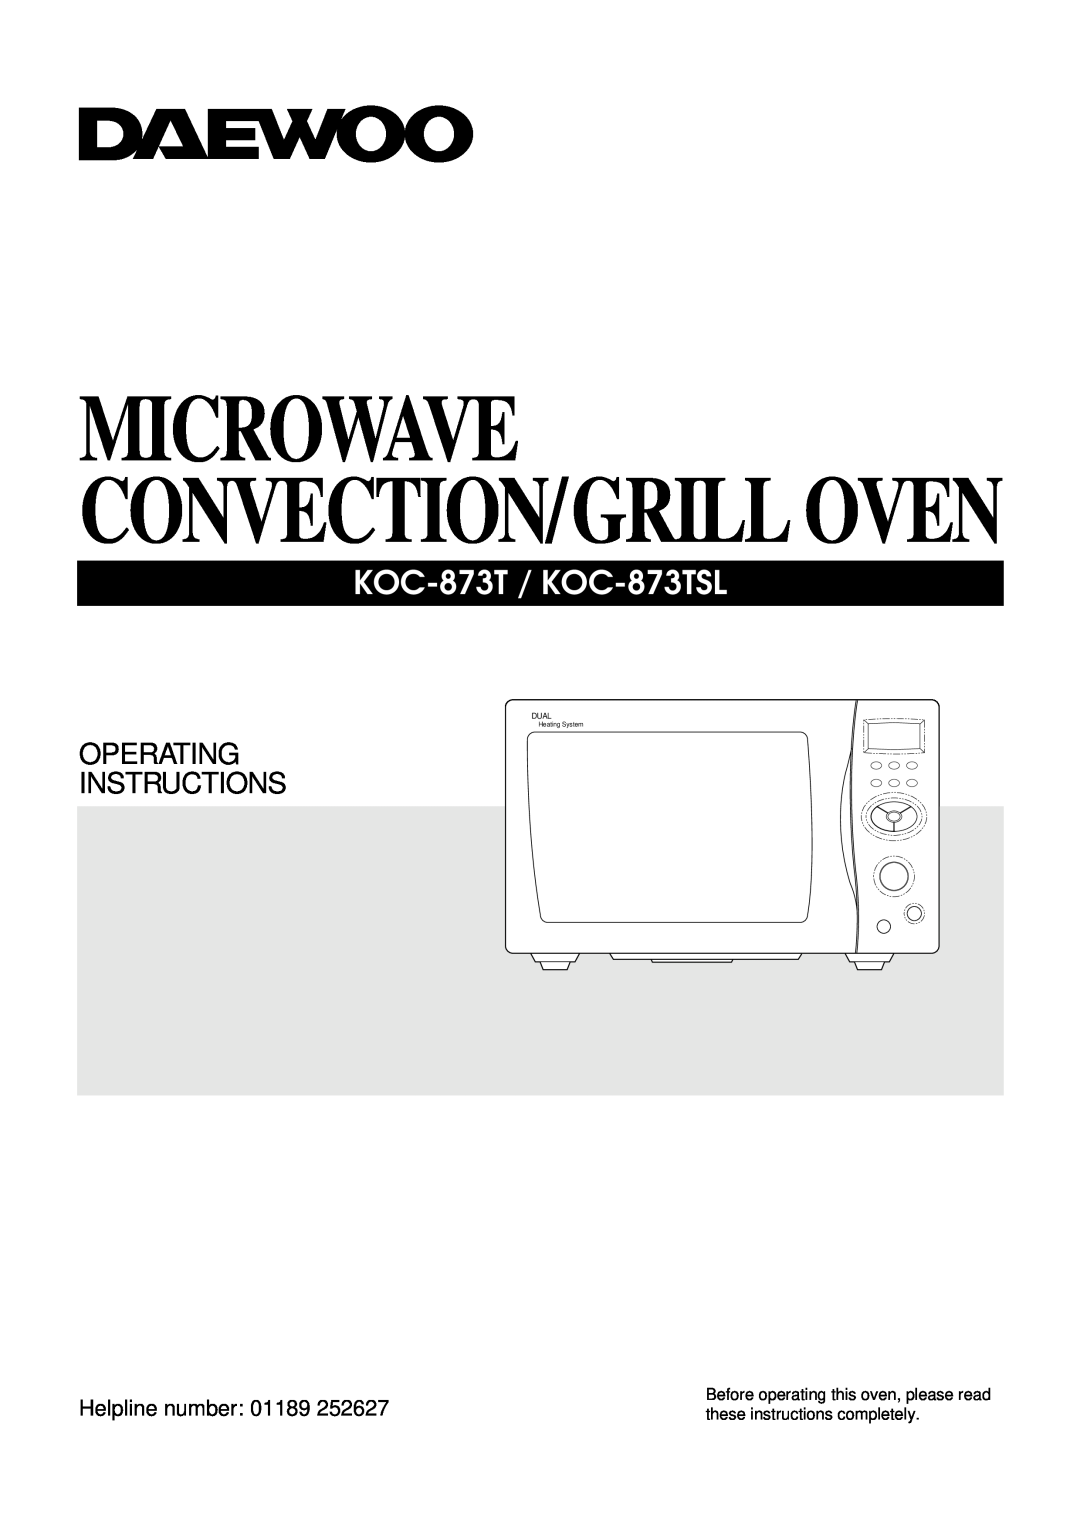 Daewoo manual Microwave Convection/Grill Oven, KOC-873T / KOC-873TSL, Operating Instructions, Helpline number, Dual 